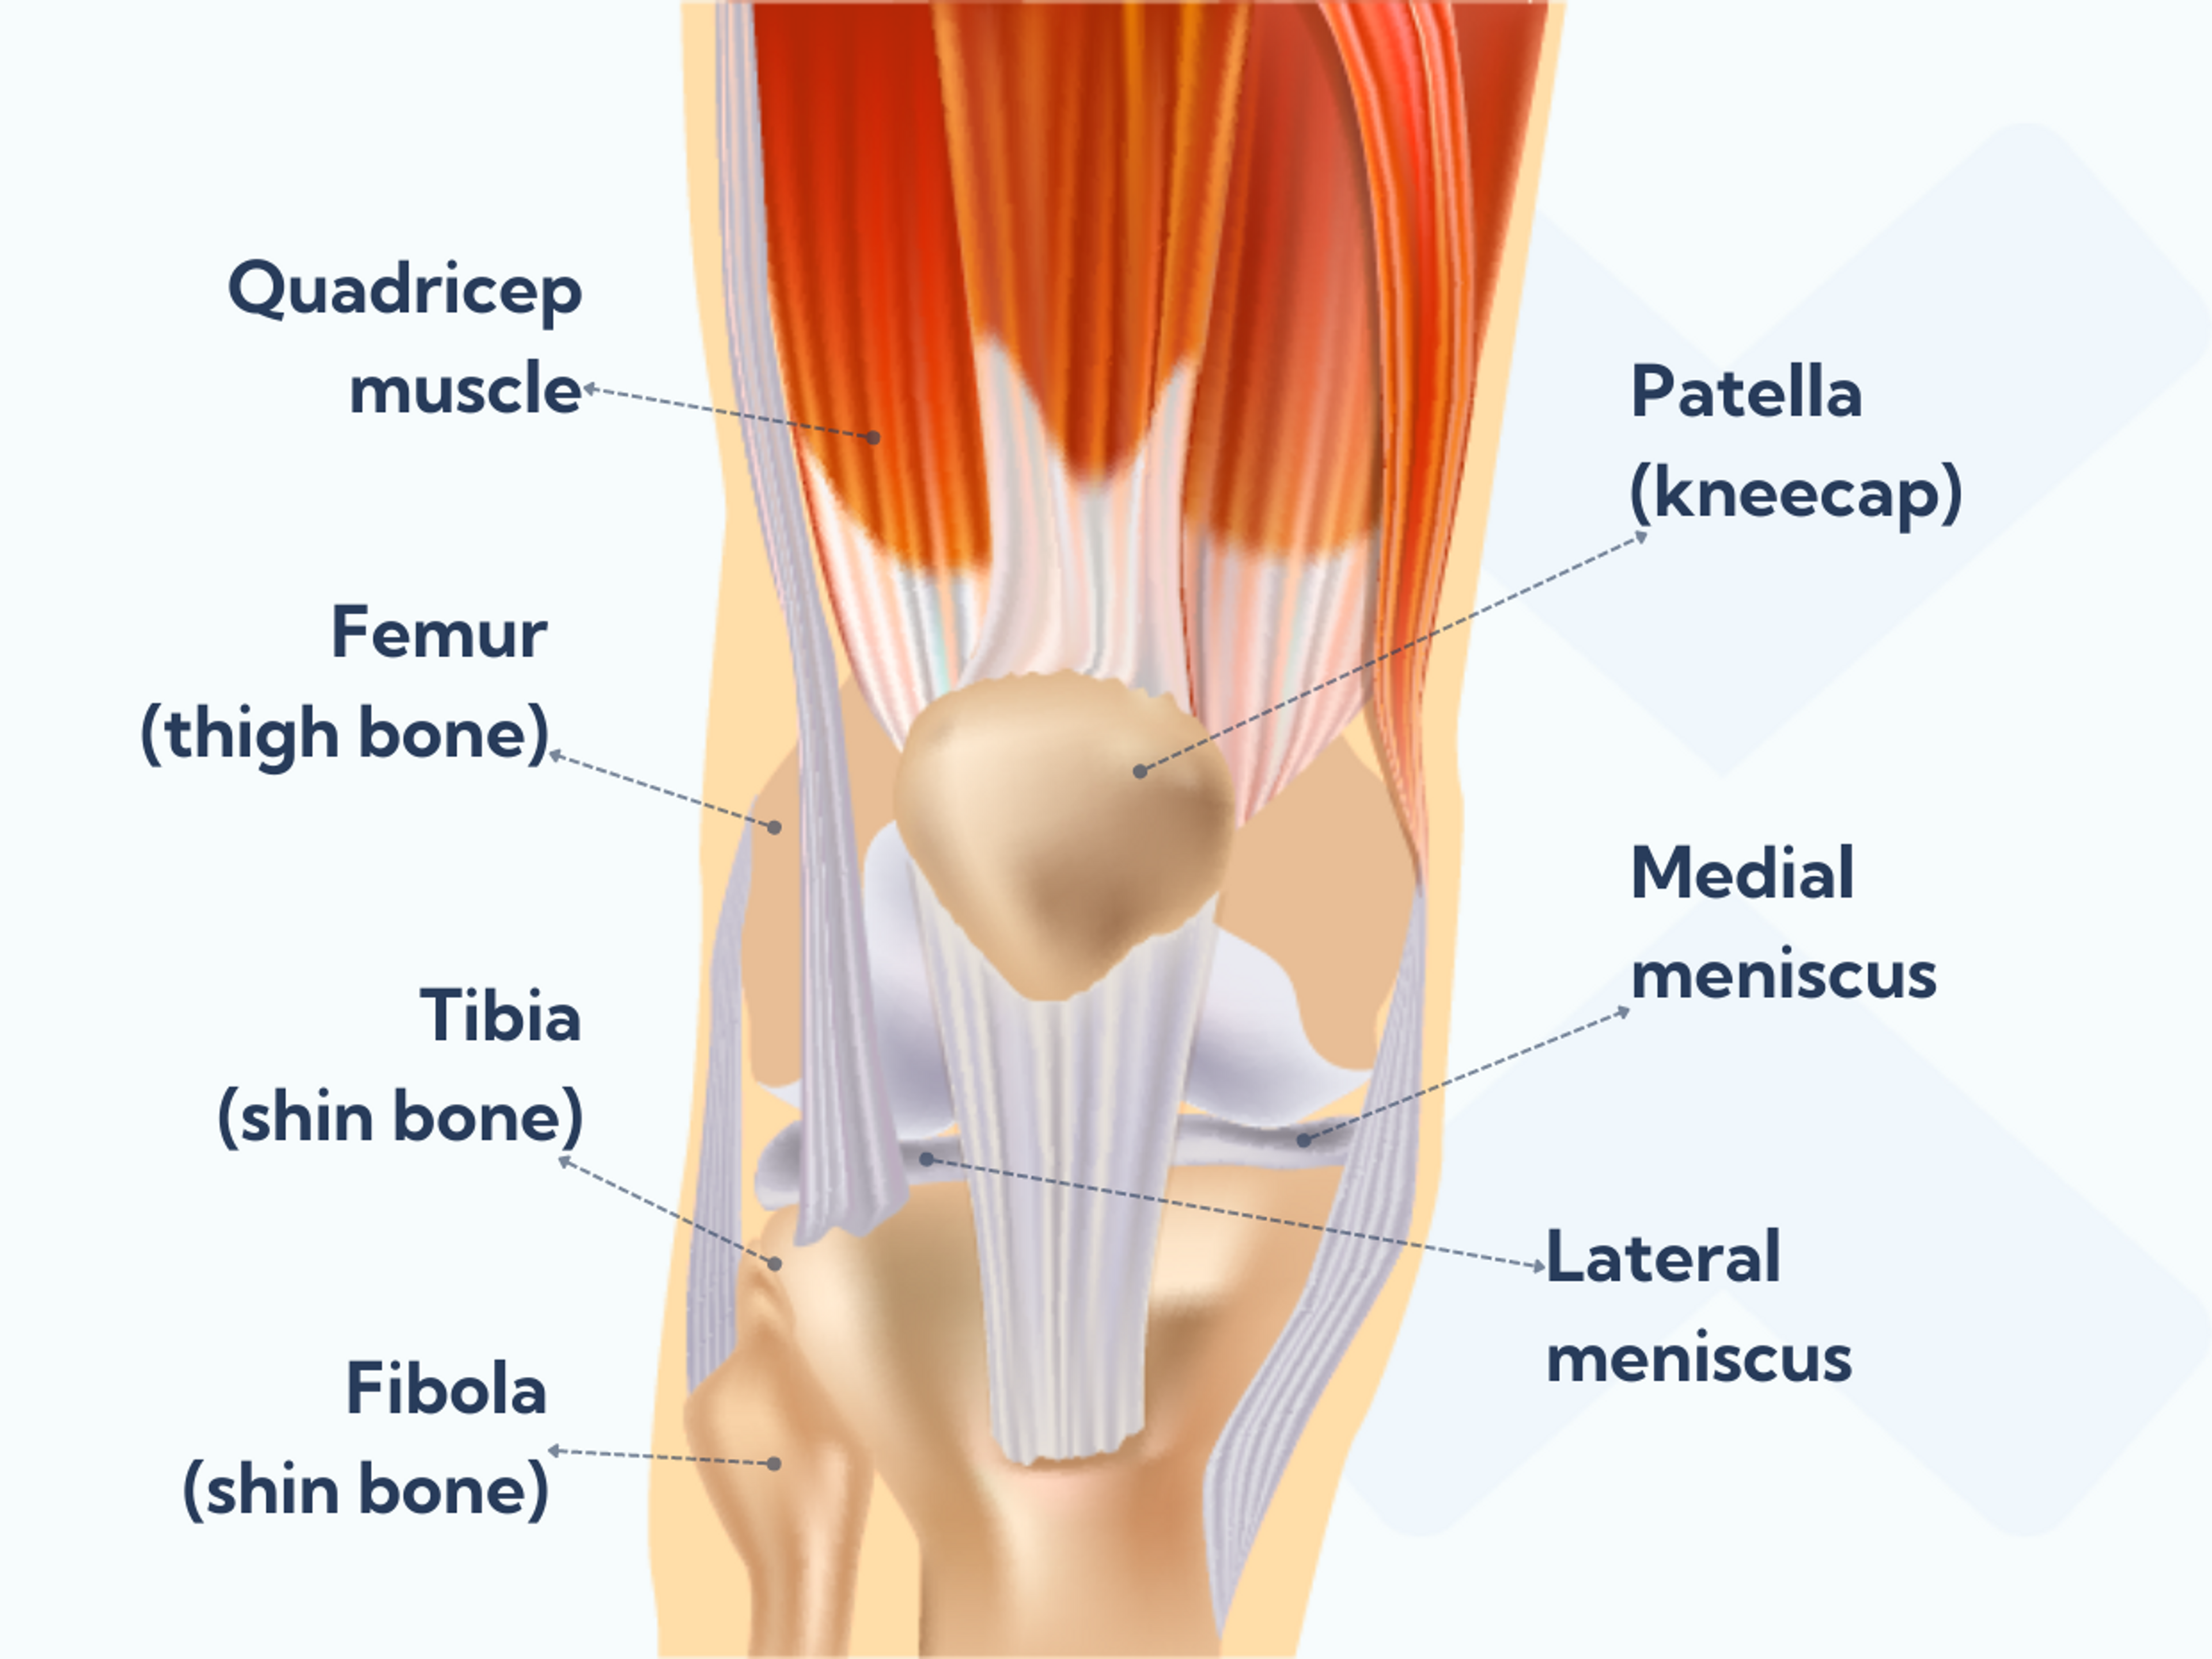 Anatomy of the knee - what structures may be injured when you sprain your knee.